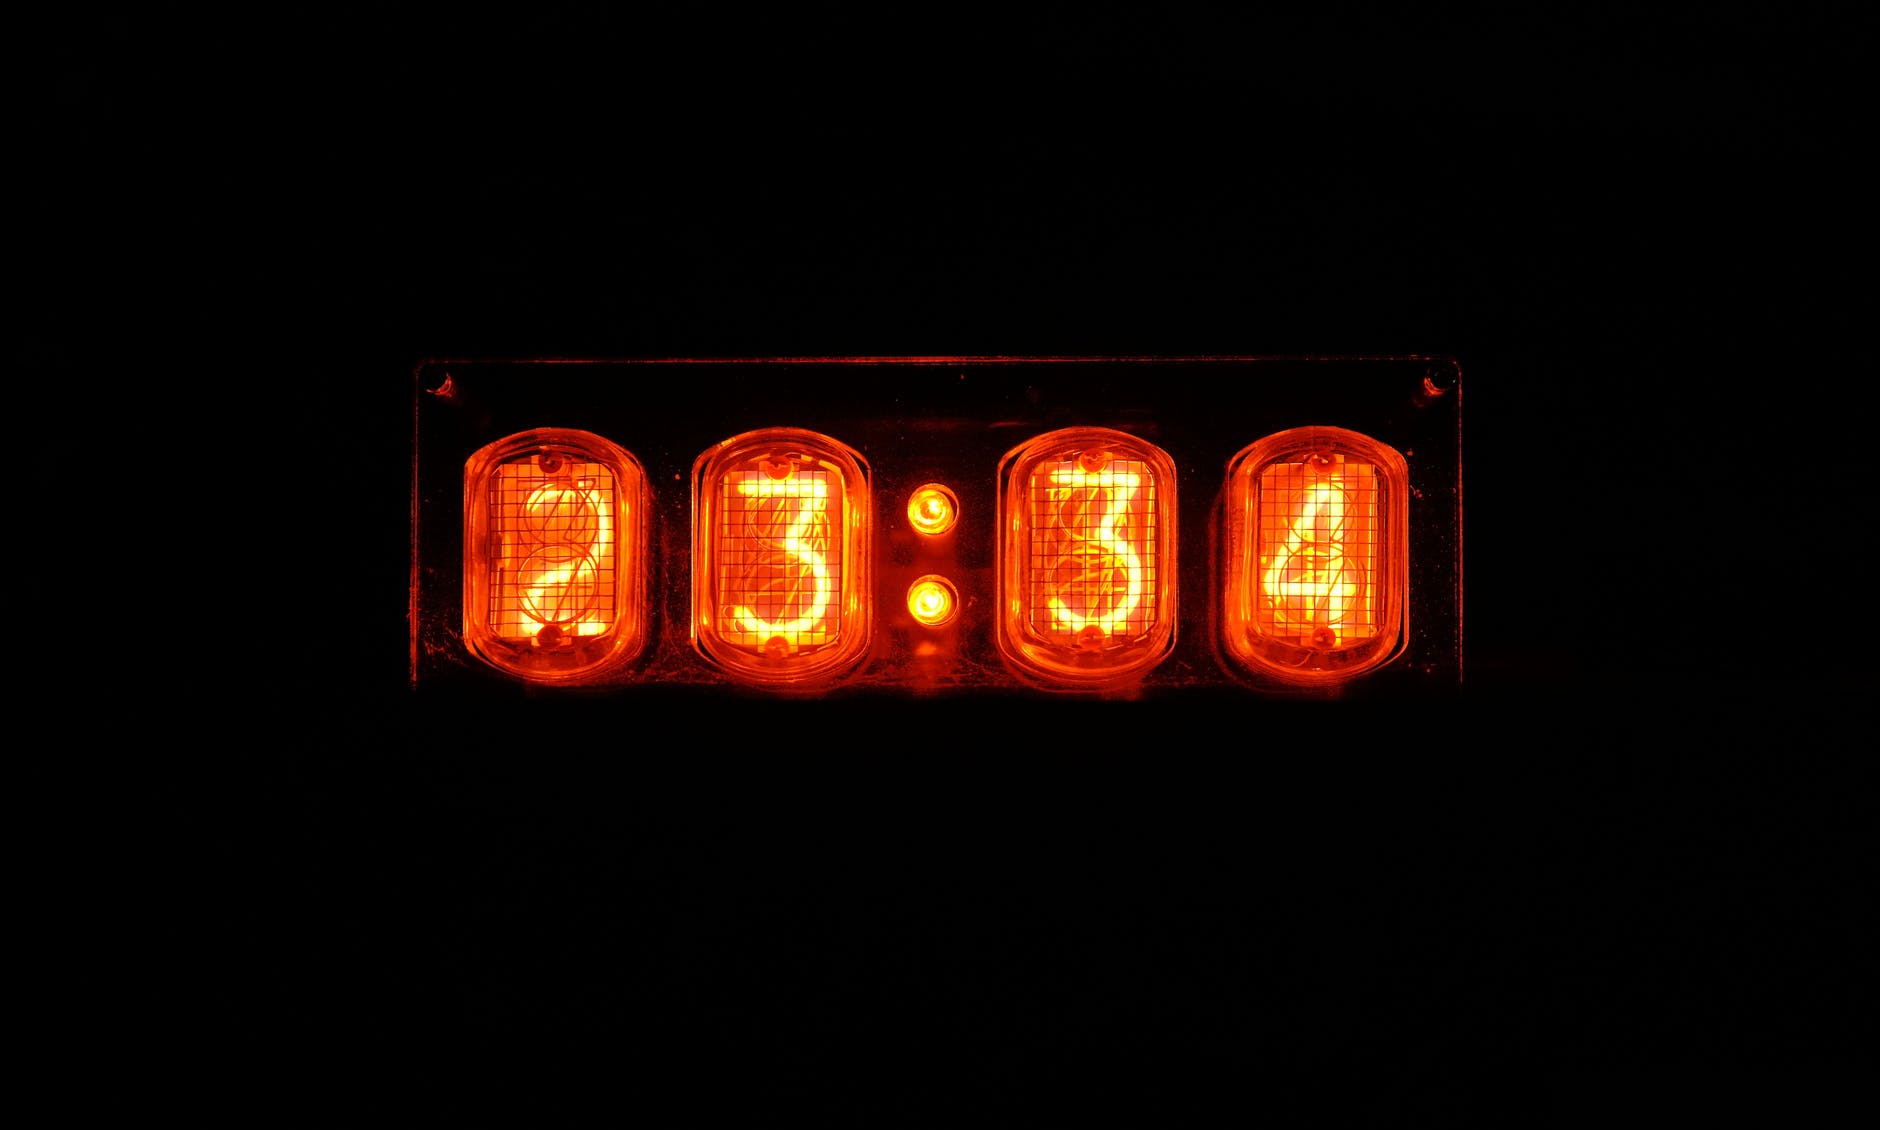 a clock with neon lights showing time